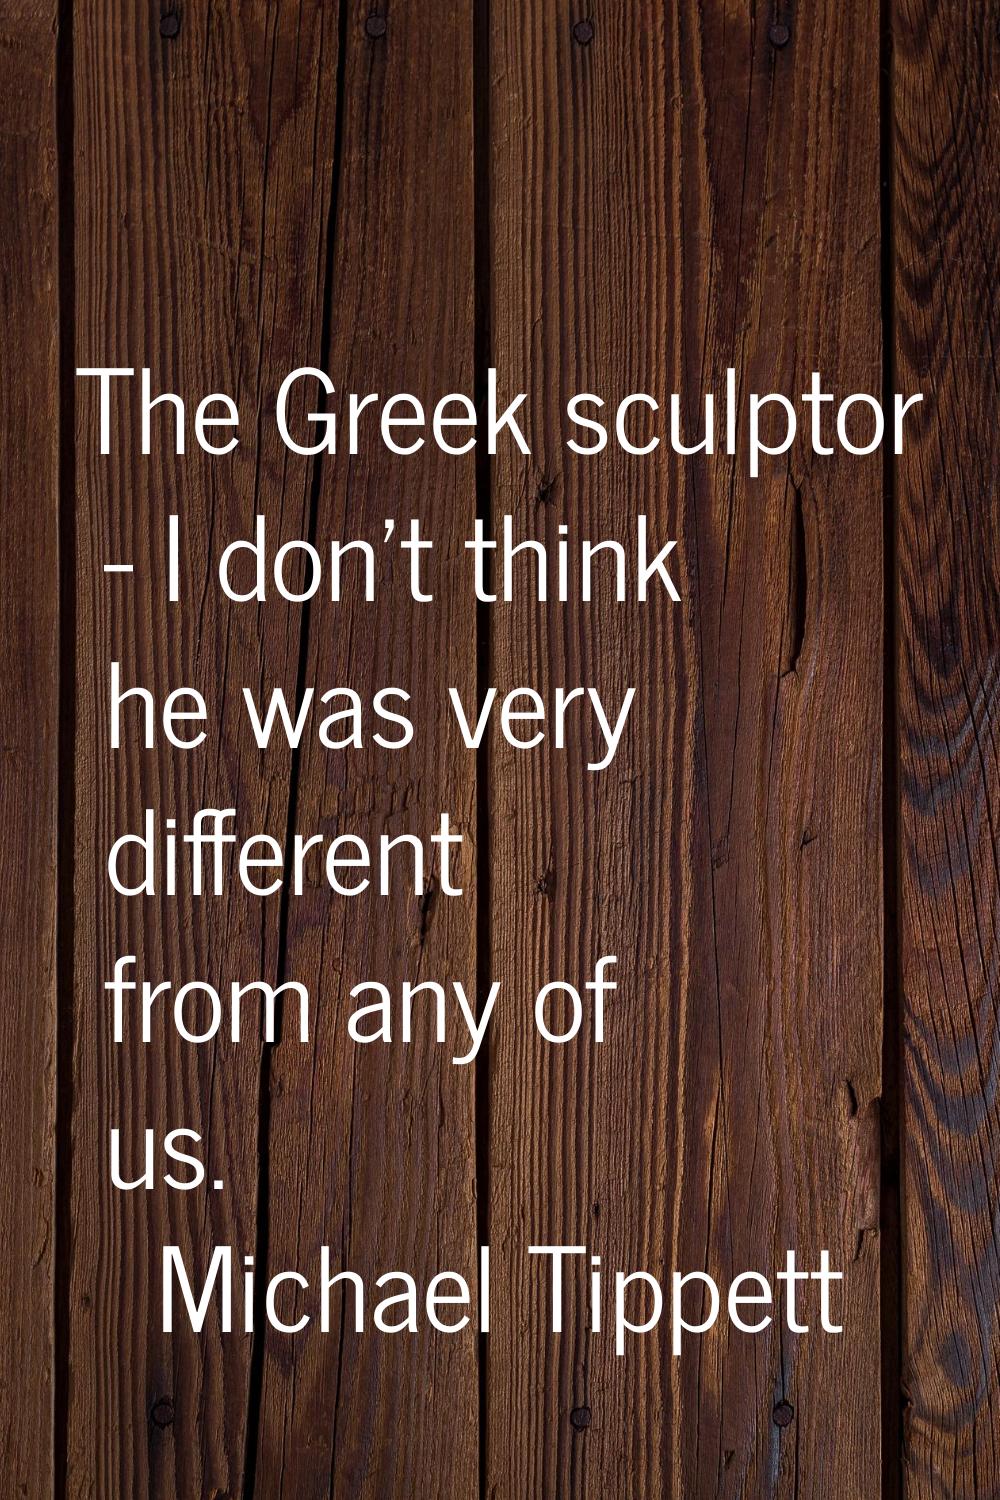 The Greek sculptor - I don't think he was very different from any of us.